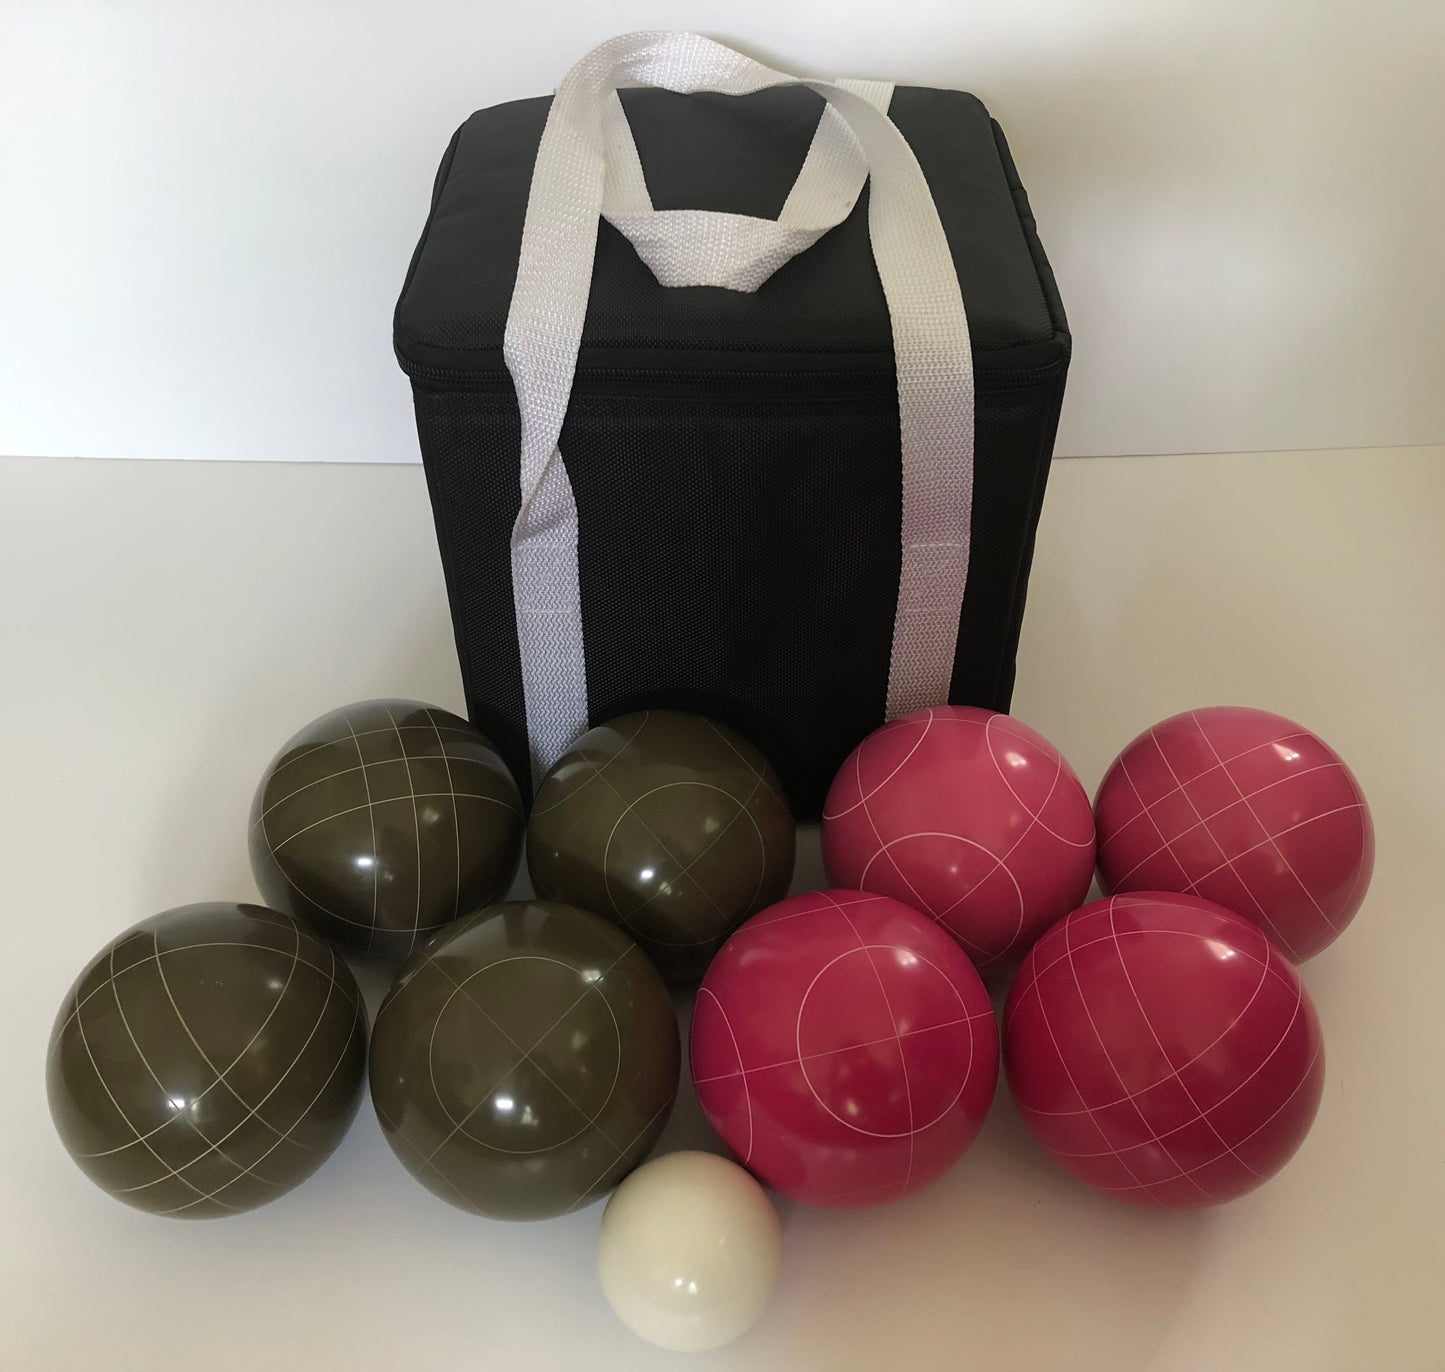 107mm Bocce Olive Brown and Pink Balls with Black Bag